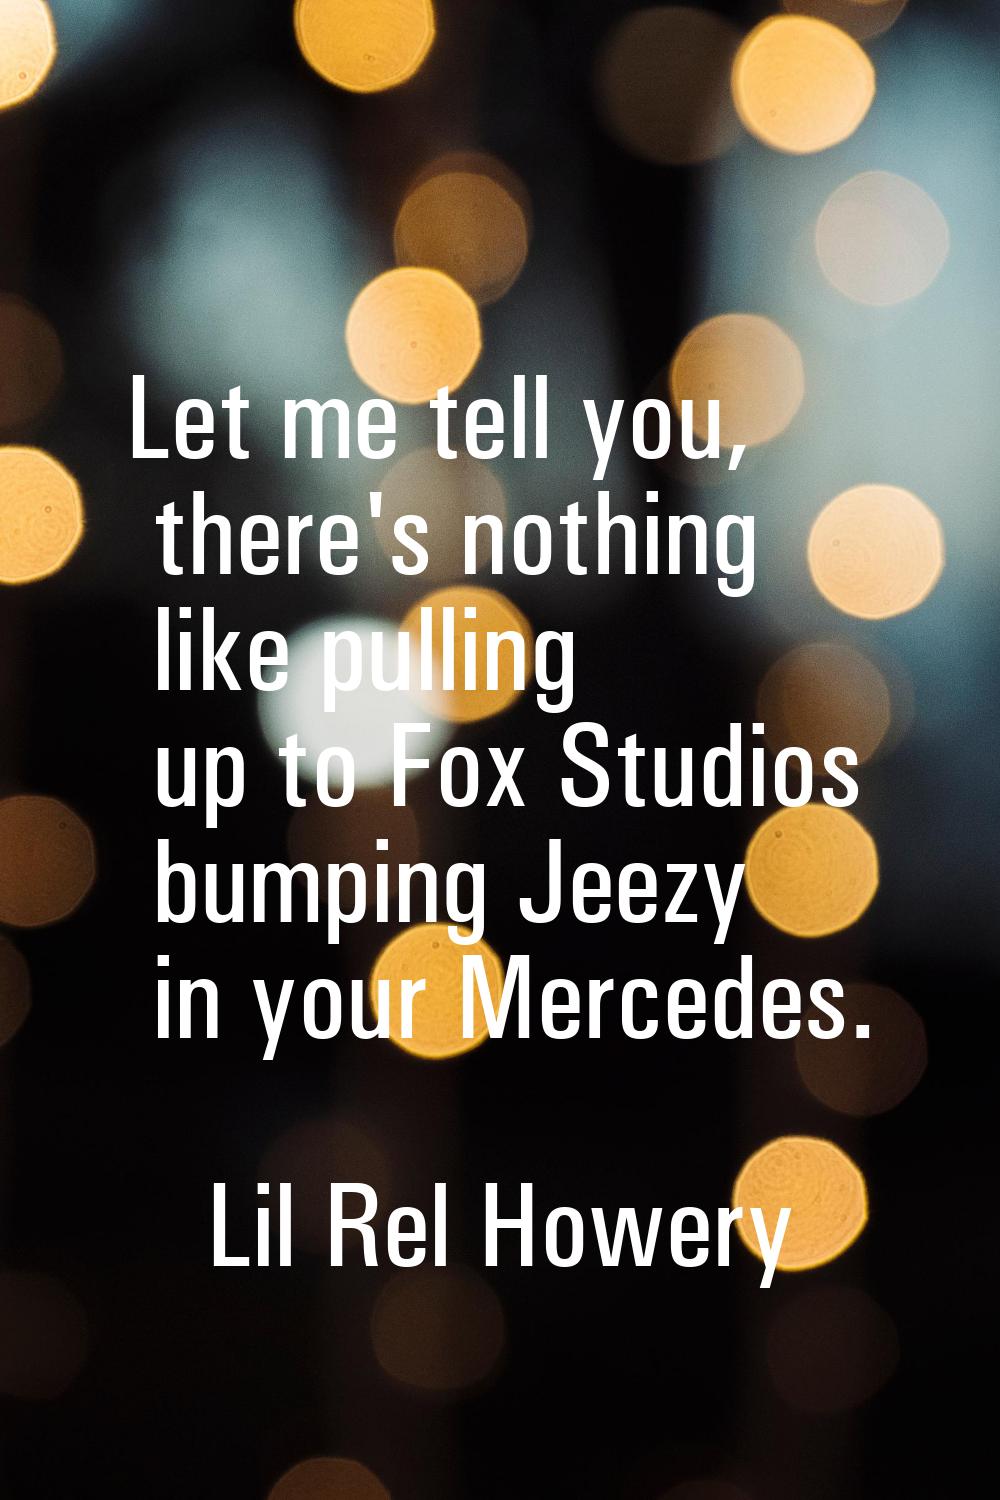 Let me tell you, there's nothing like pulling up to Fox Studios bumping Jeezy in your Mercedes.